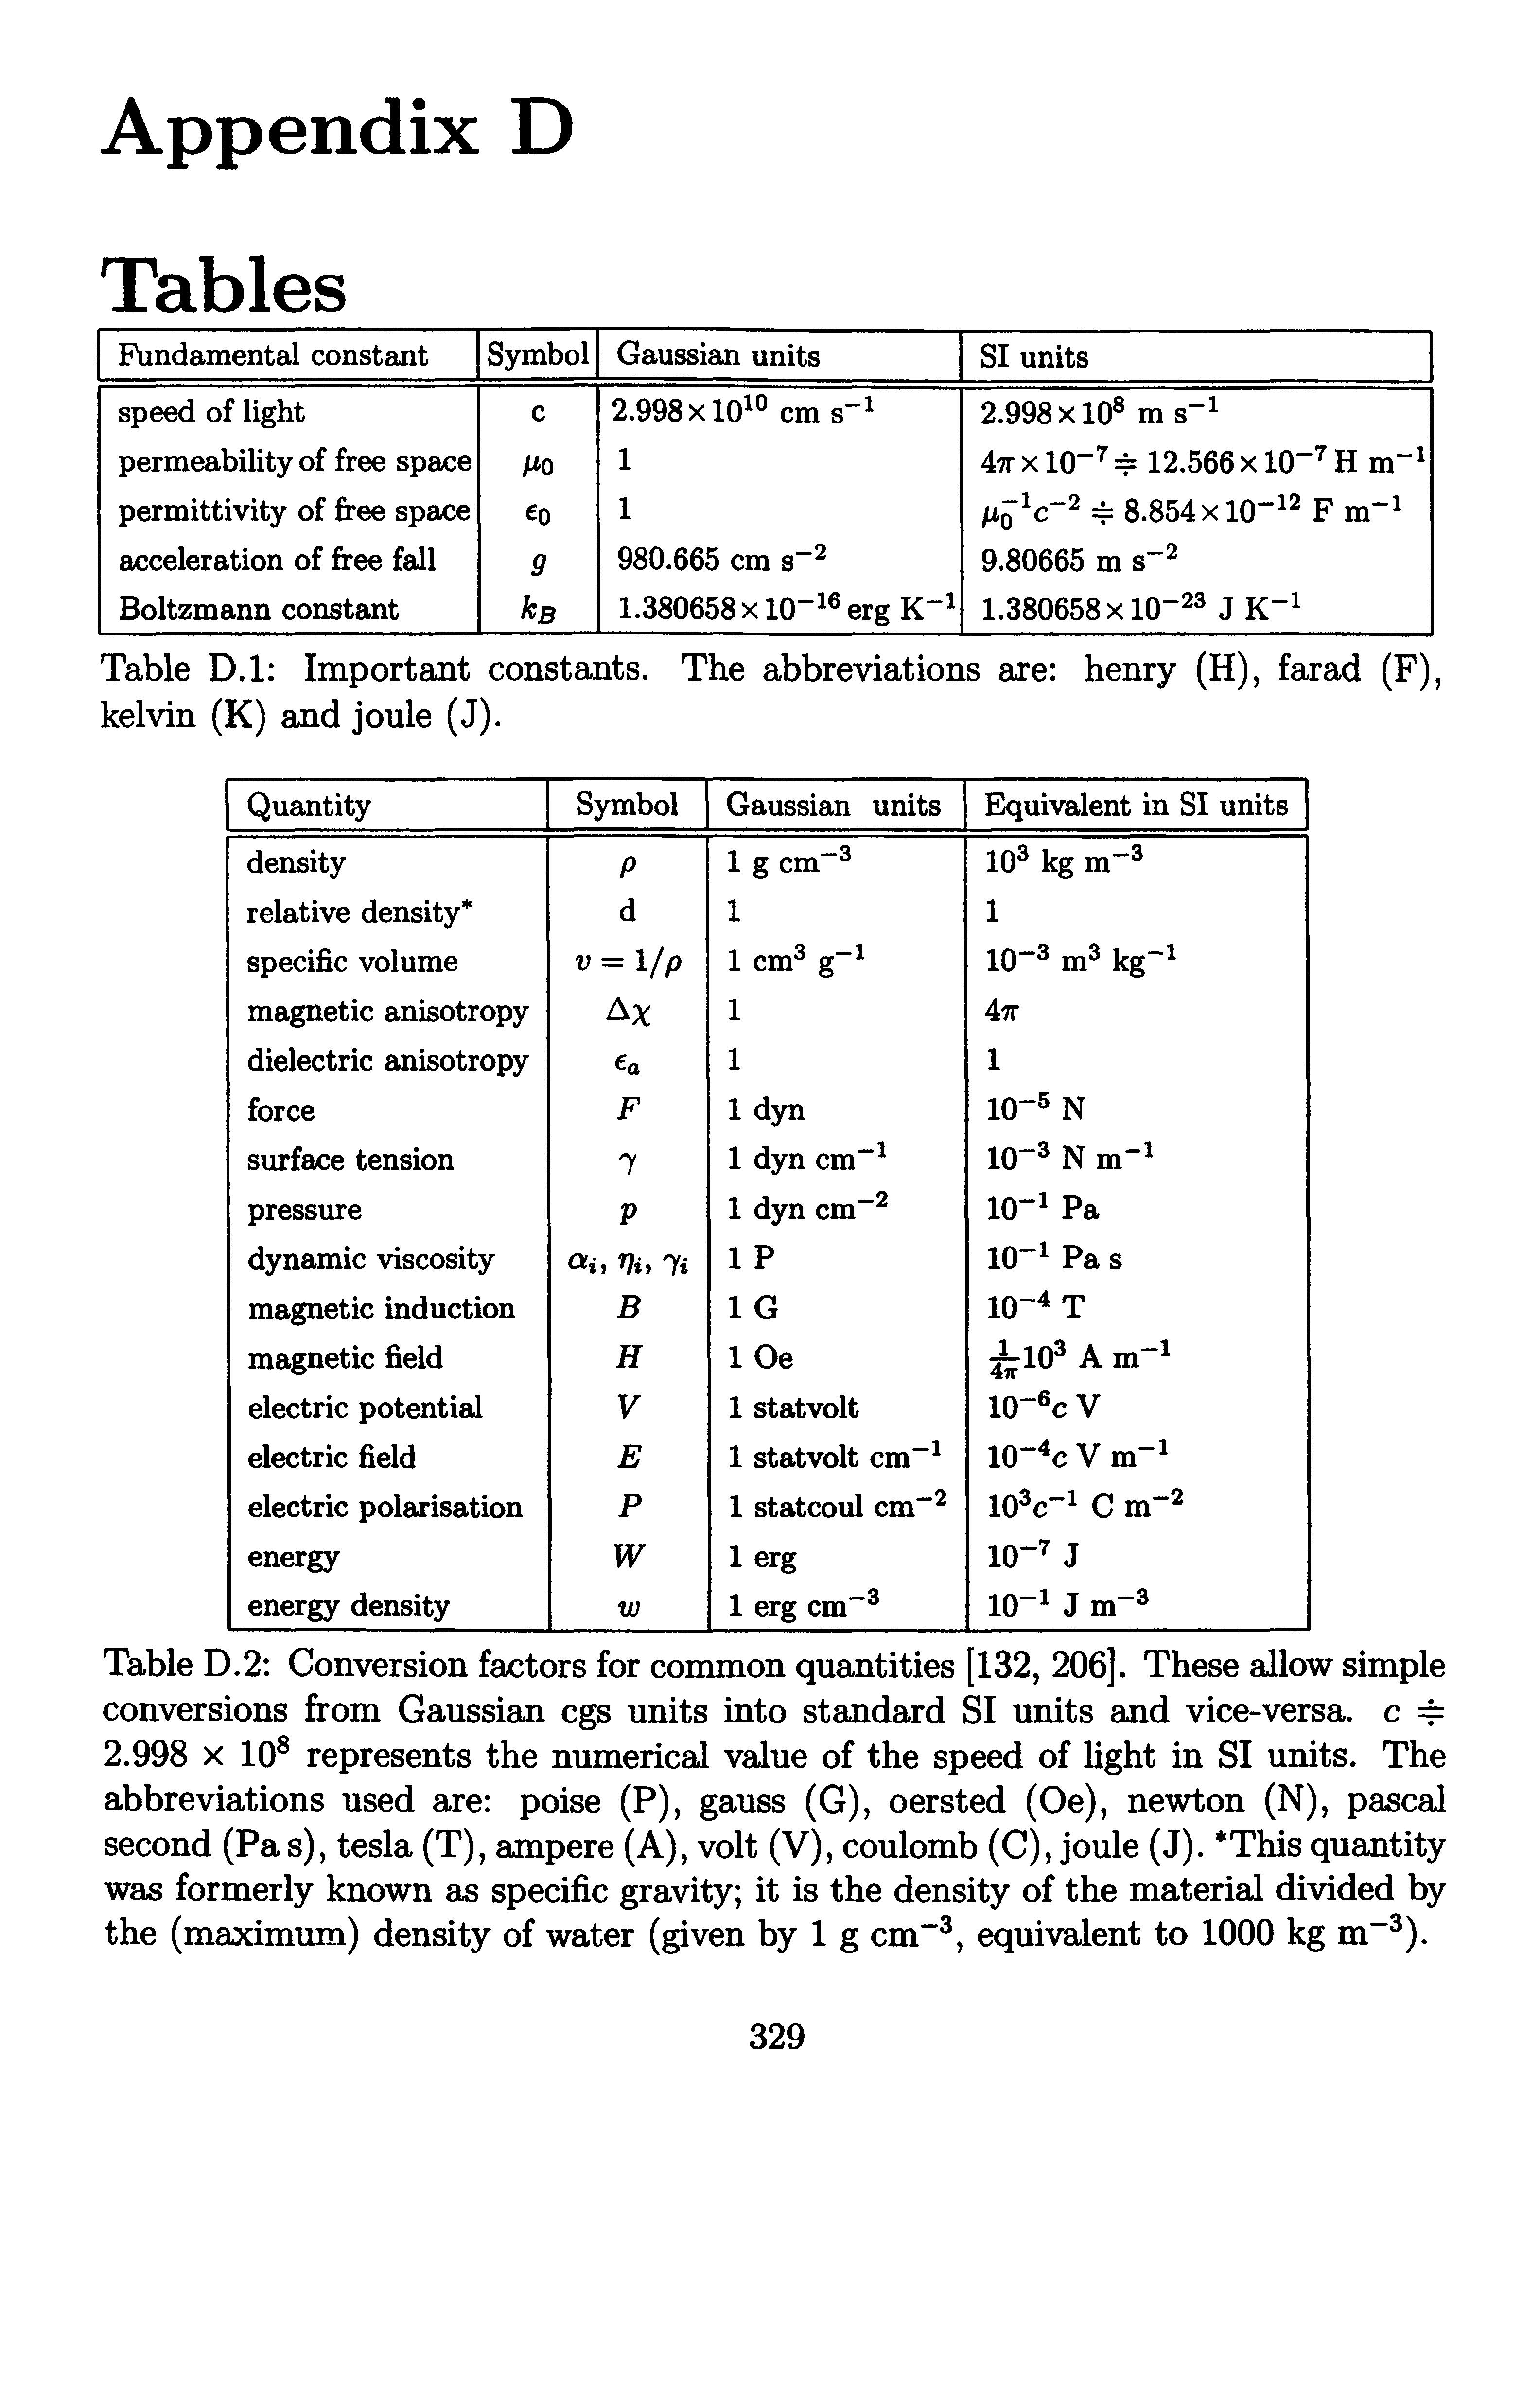 Table D.2 Conversion factors for common quantities [132, 206]. These allow simple conversions from Gaussian cgs units into standard SI units and vice-versa, c == 2.998 X 10 represents the numerical value of the speed of light in SI units. The abbreviations used are poise (P), gauss (G), oersted (Oe), newton (N), pascal second (Pa s), tesla (T), ampere (A), volt (V), coulomb (C), joule (J). This quantity was formerly known as specific gravity it is the density of the material divided by the (maximum) density of water (given by 1 g cm , equivalent to 1000 kg m ).